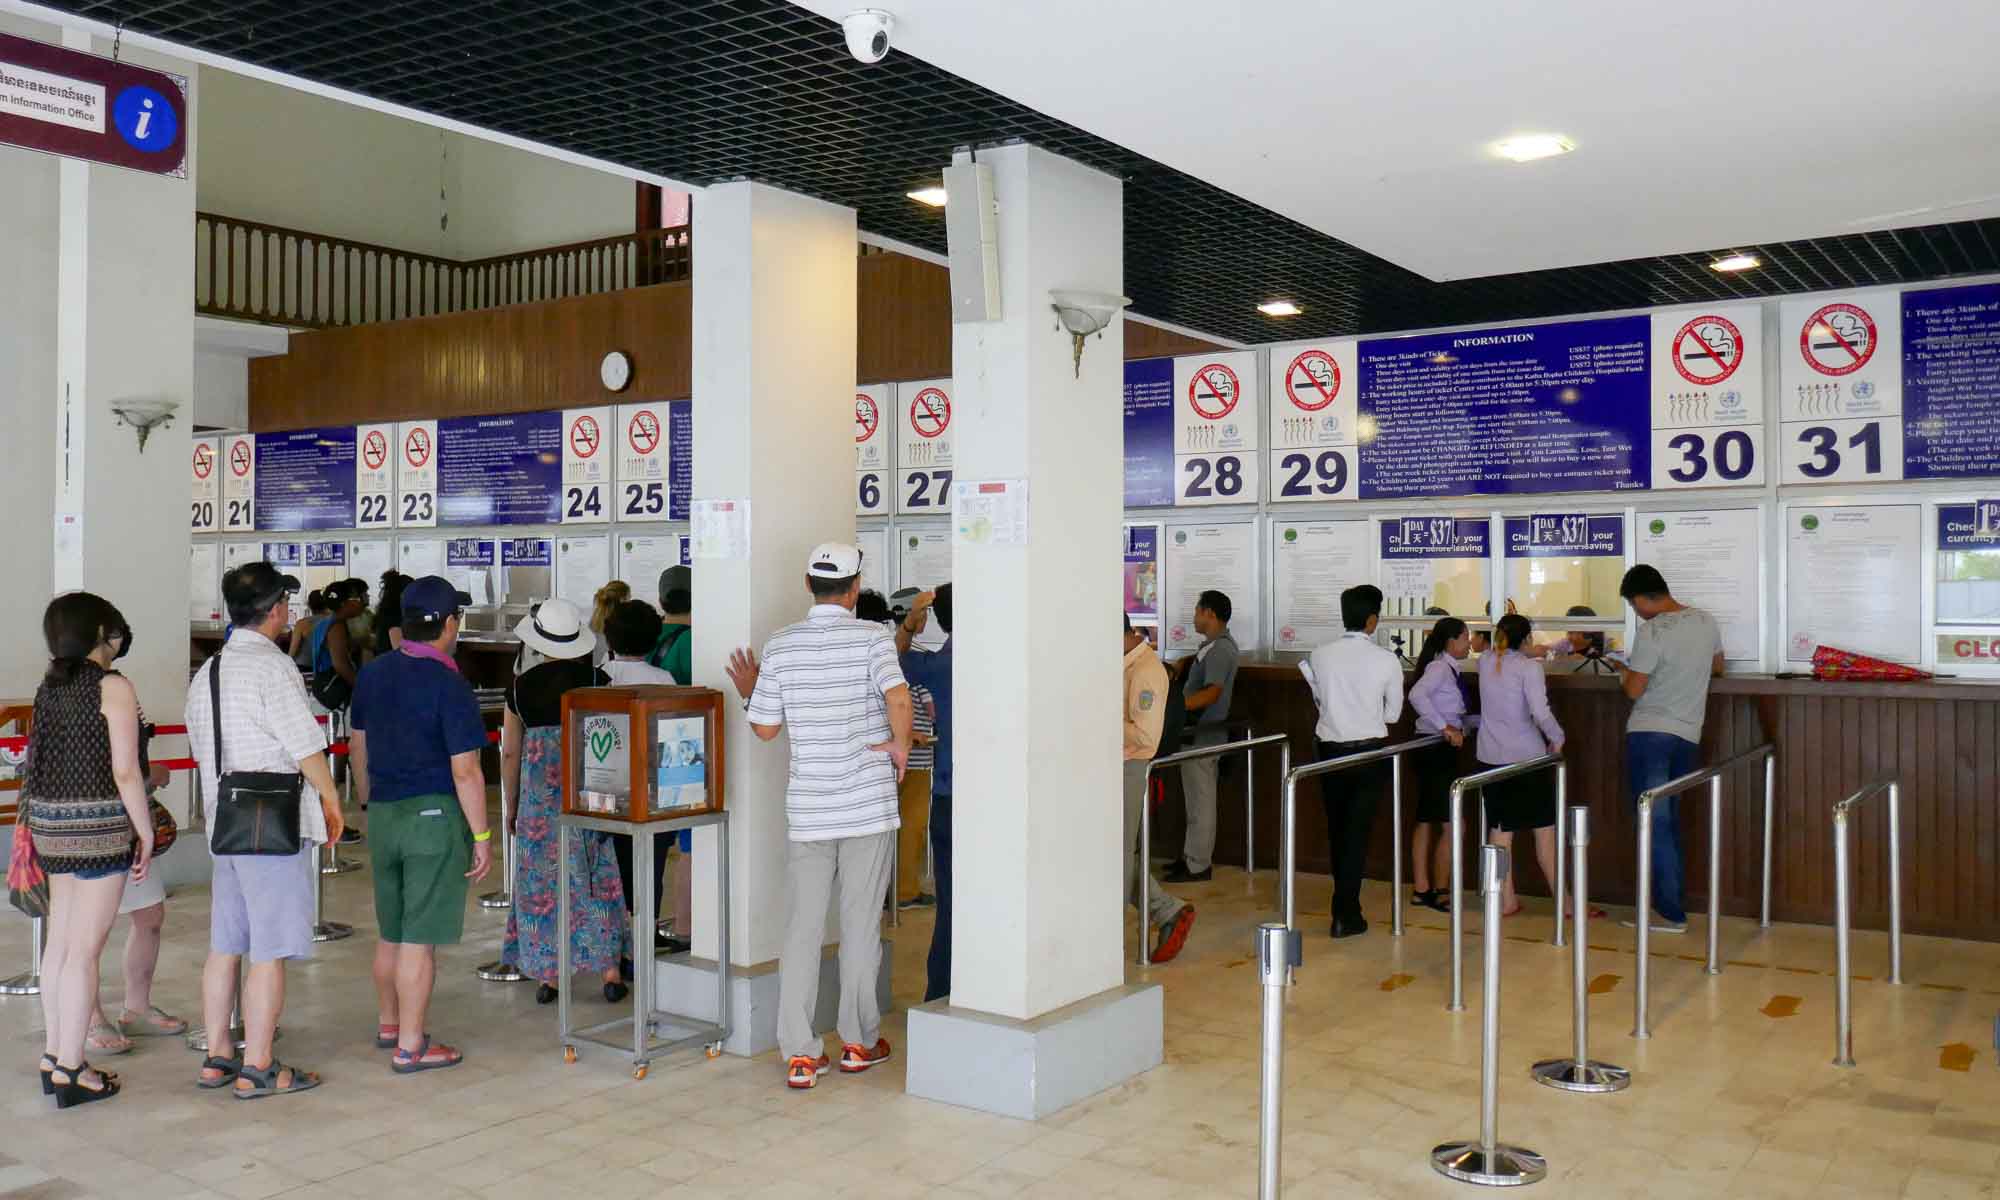 The ticket booth at Charles De Gaulle